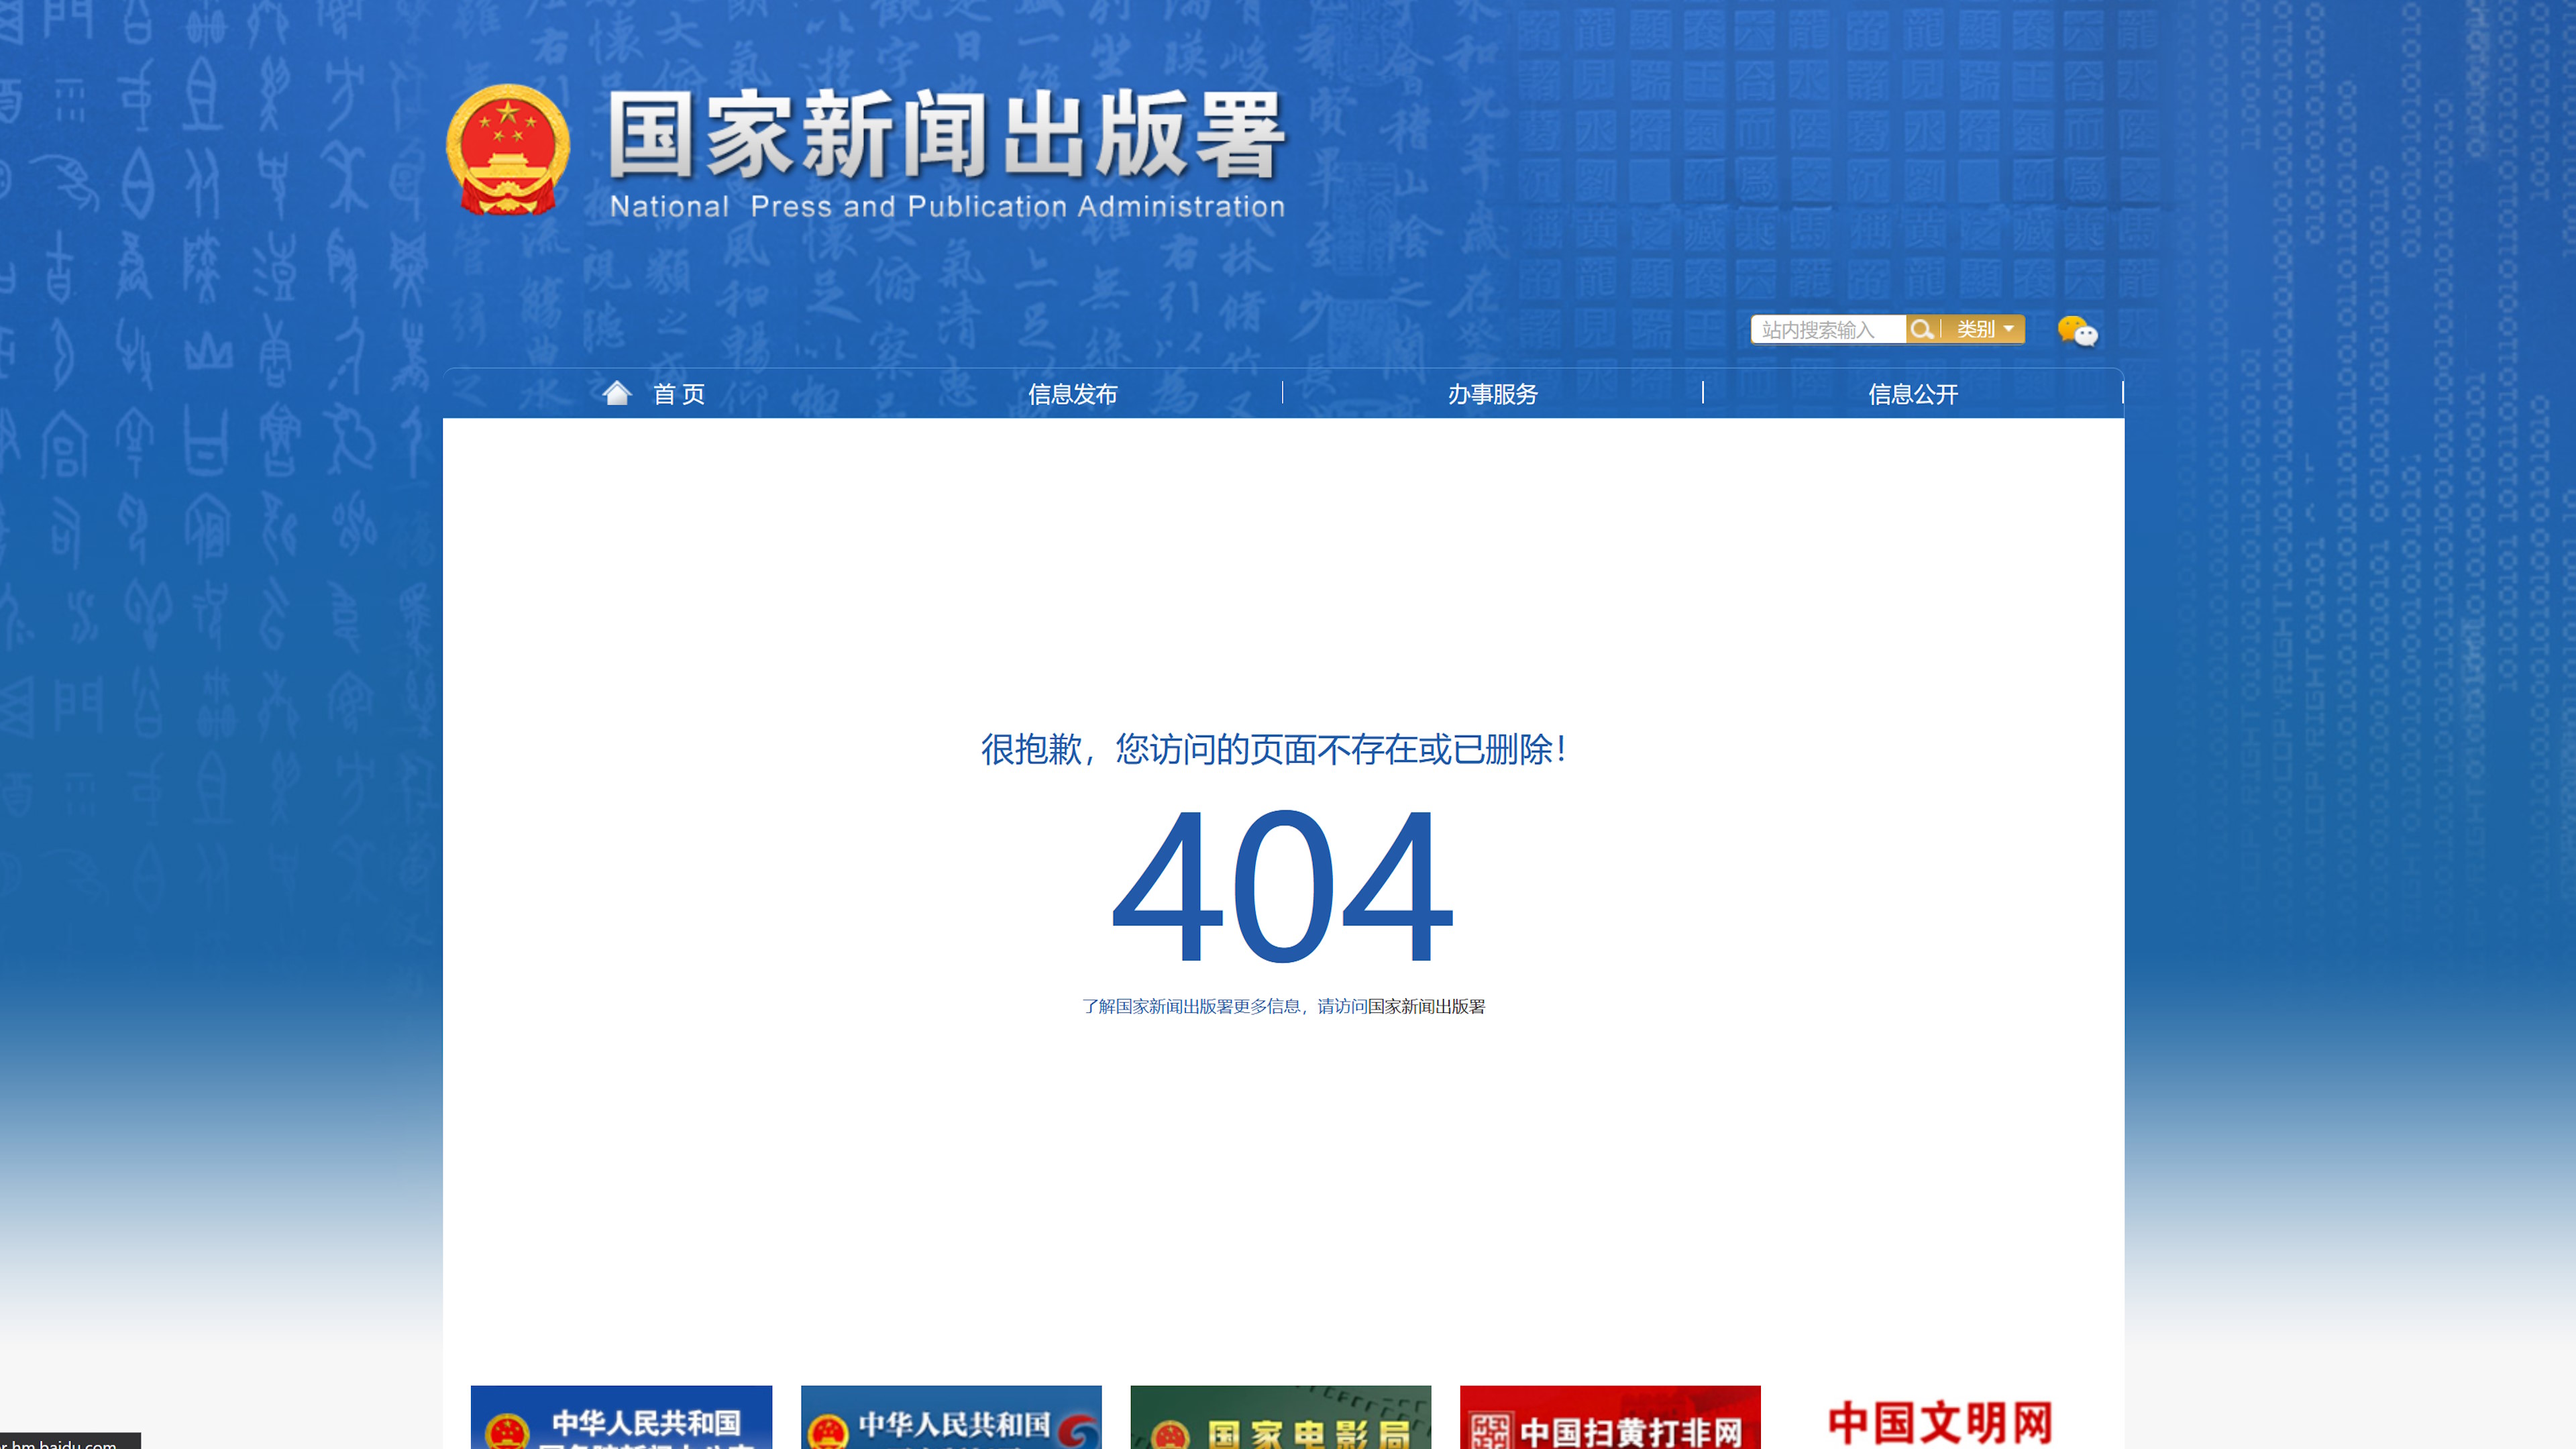 404 error on China's National Press and Publication Administration website